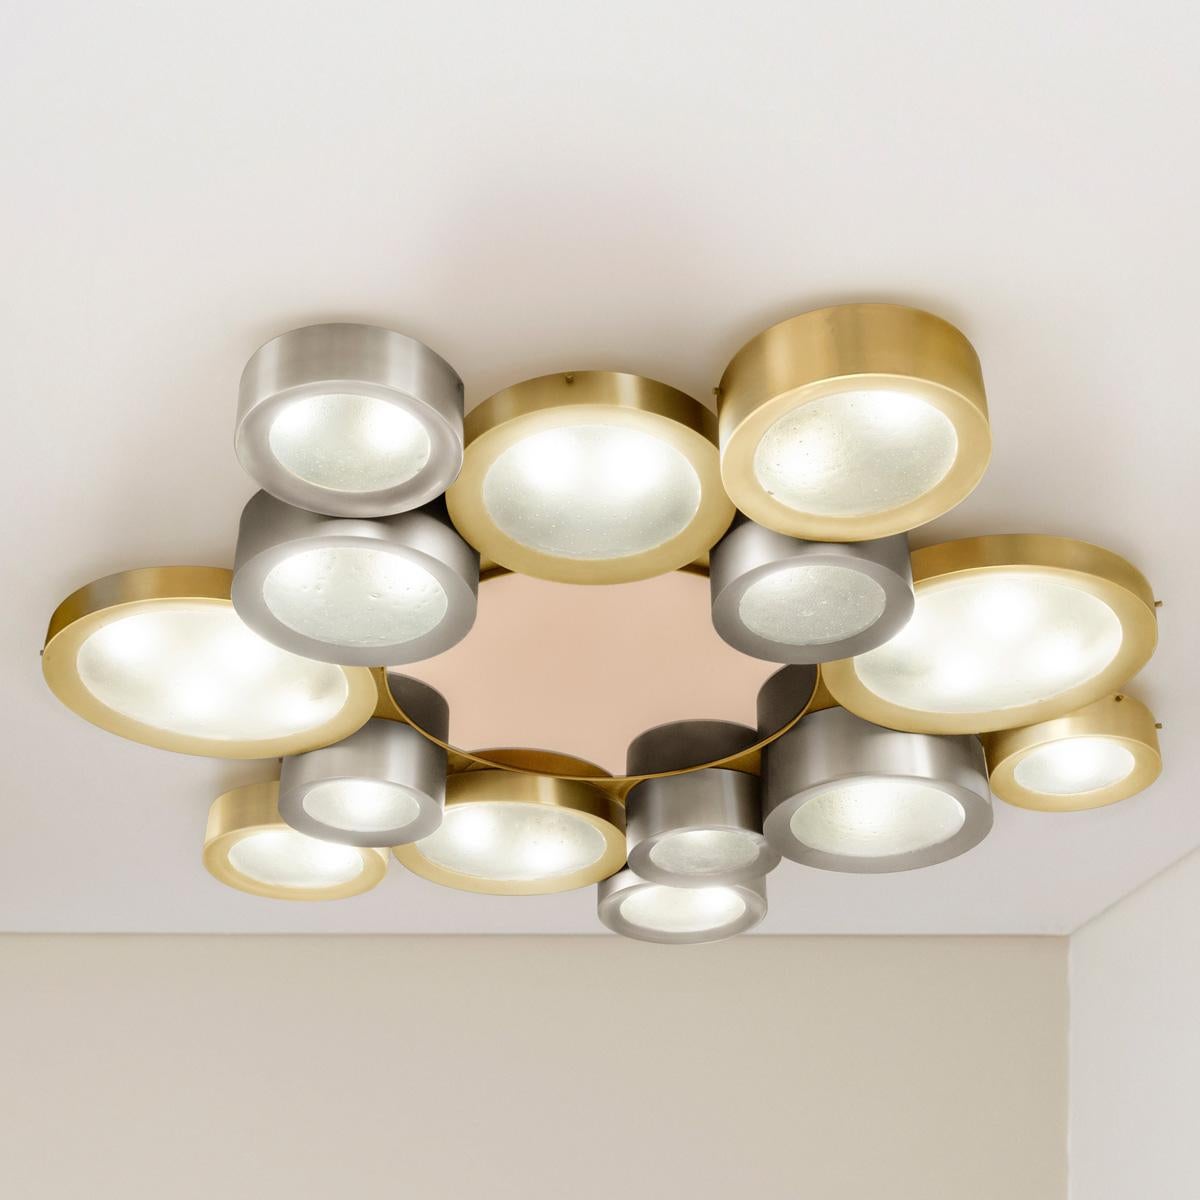 The Helios ceiling light features an imposing composition of illuminated Murano glass shades gravitating around a central tinted mirror. The first images show the fixture in a satin brass and satin nickel finish with a rose center mirror-subsequent